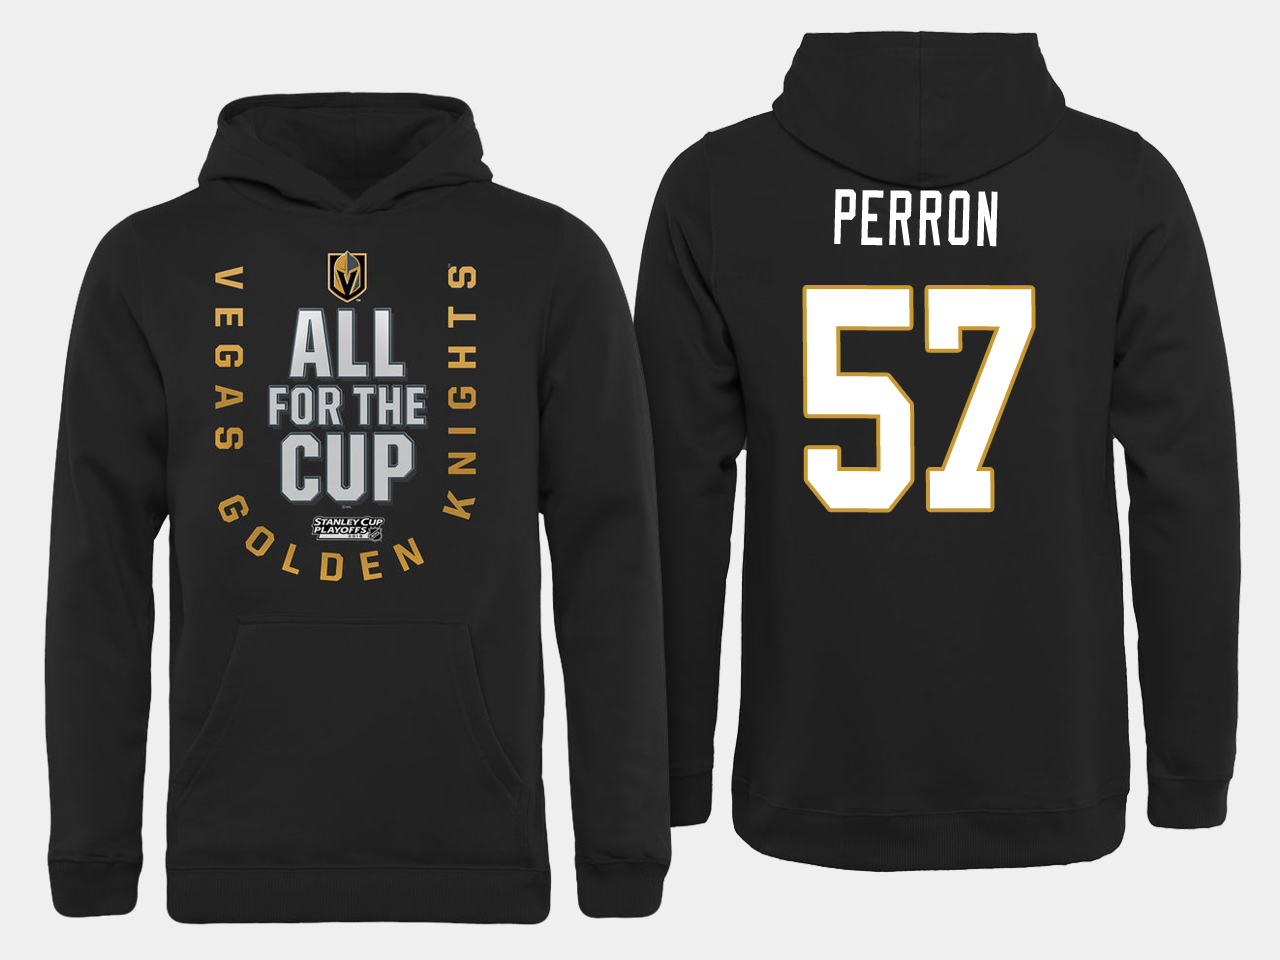 Men NHL Vegas Golden Knights 57 Perron All for the Cup hoodie